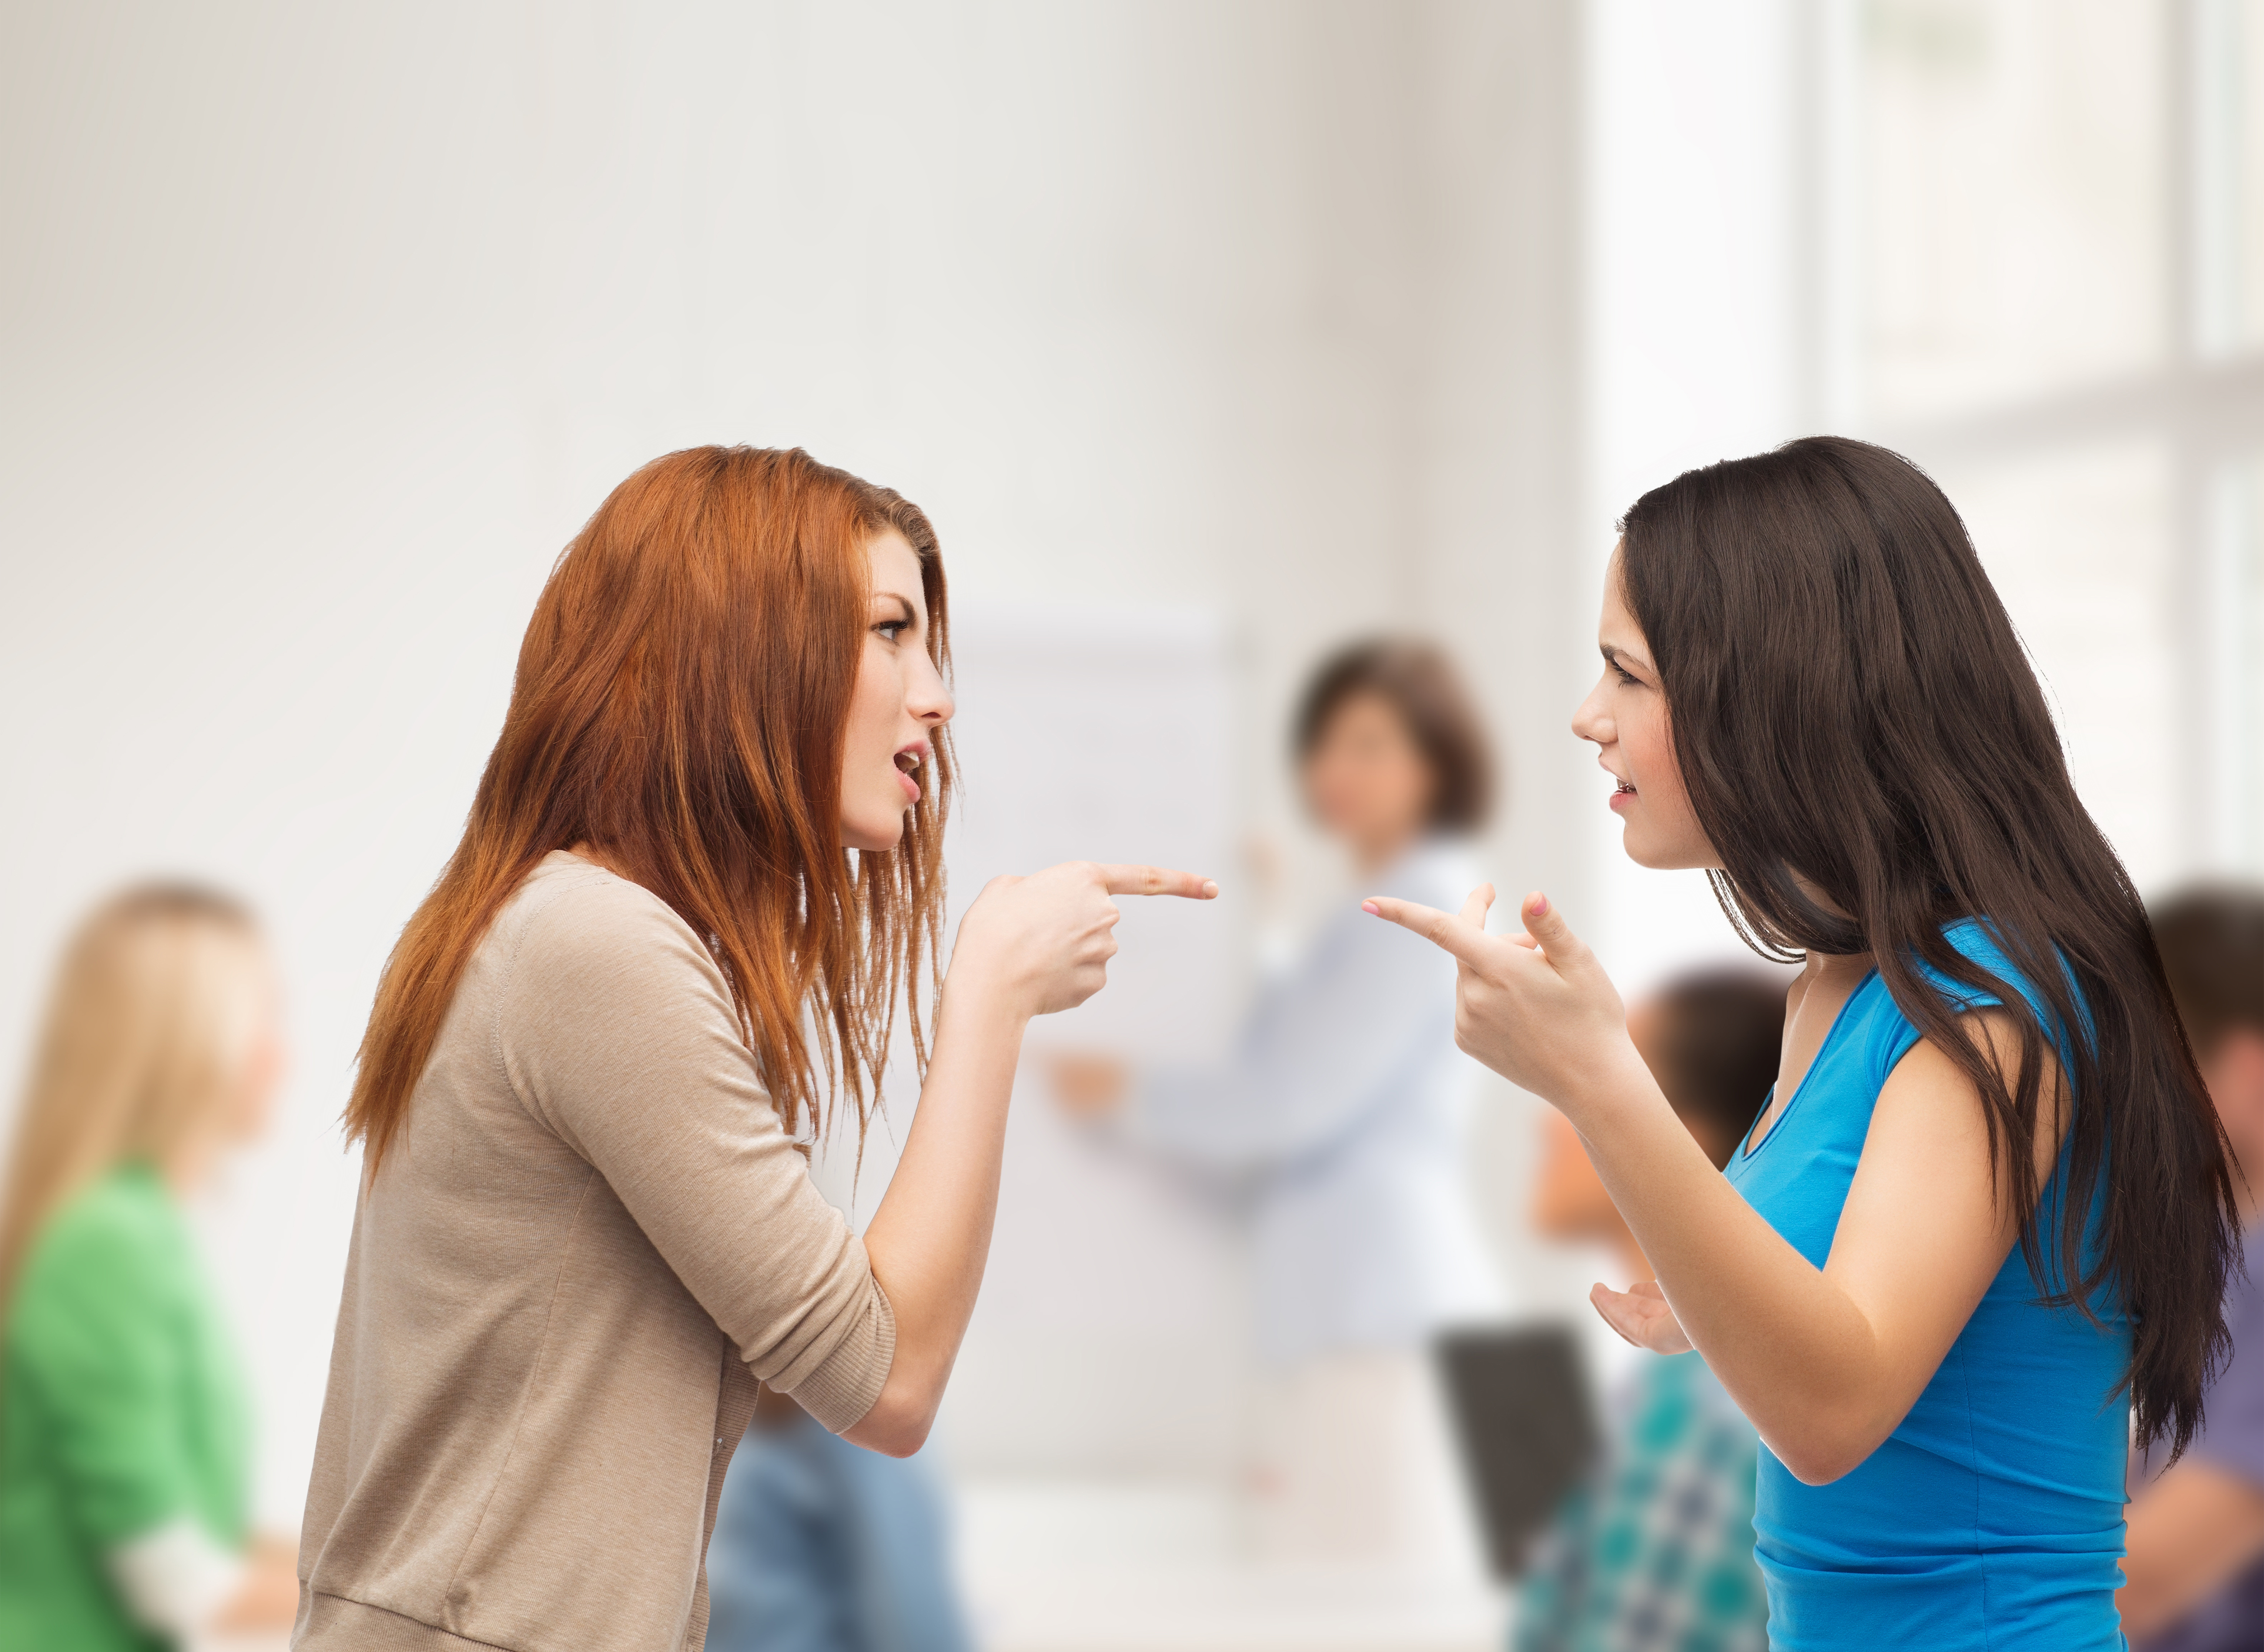 An image of two young women arguing